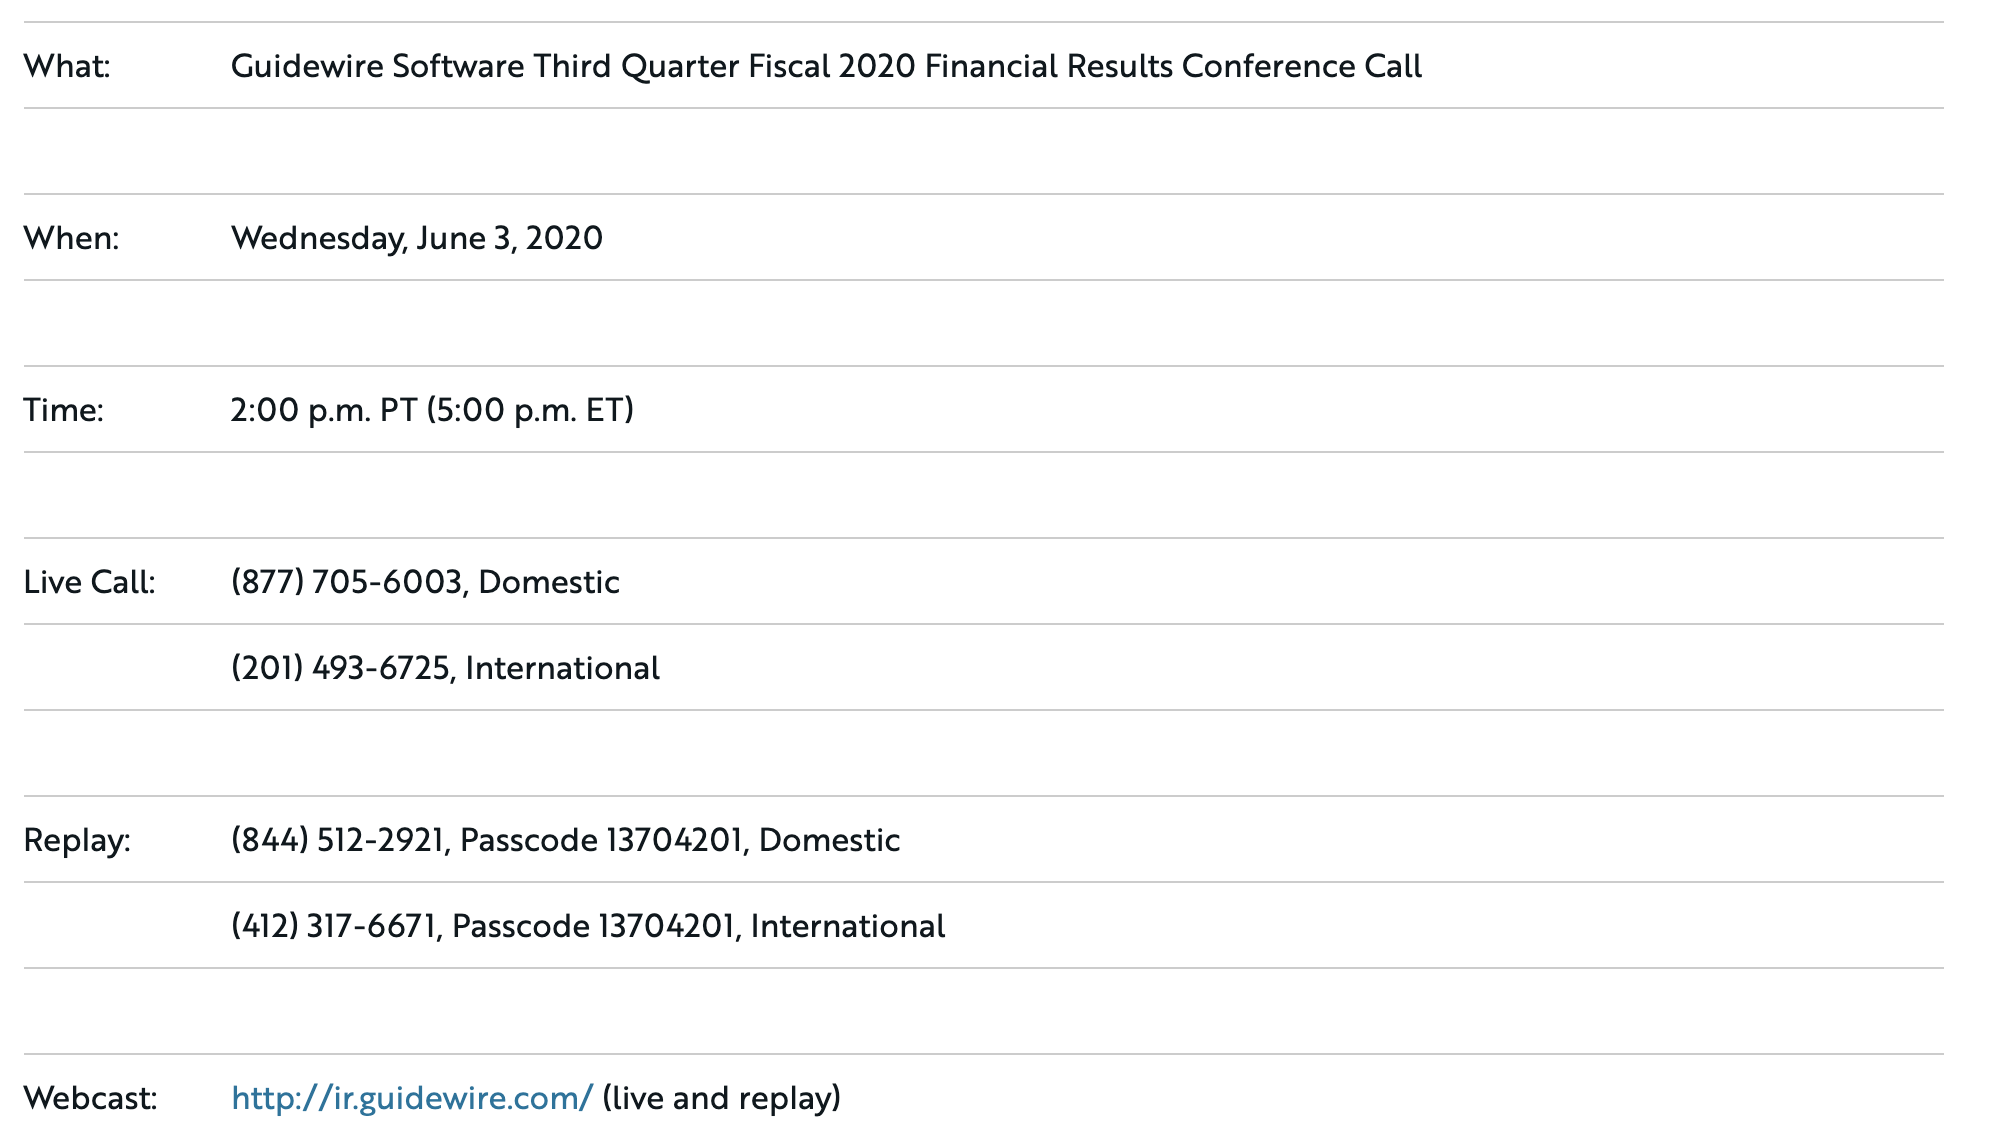 Q3 2020 Conference Call